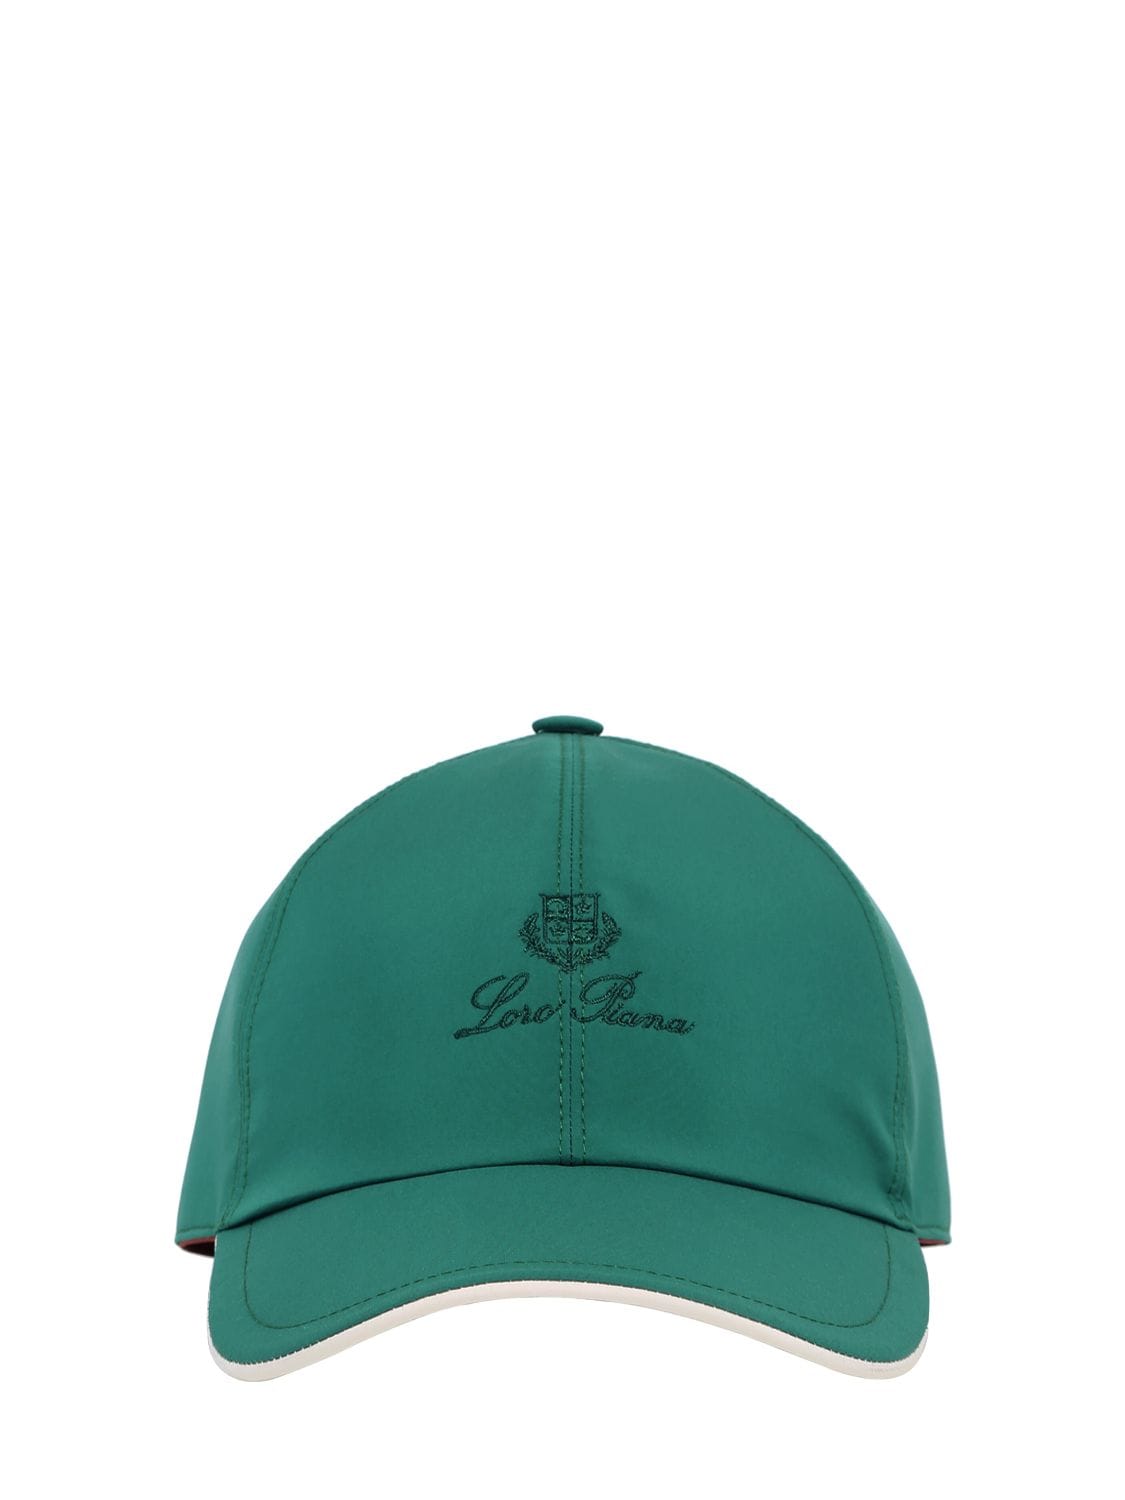 Loro Piana Logo Embroidery Wind Storm System B Cap In Mint,ivory | ModeSens